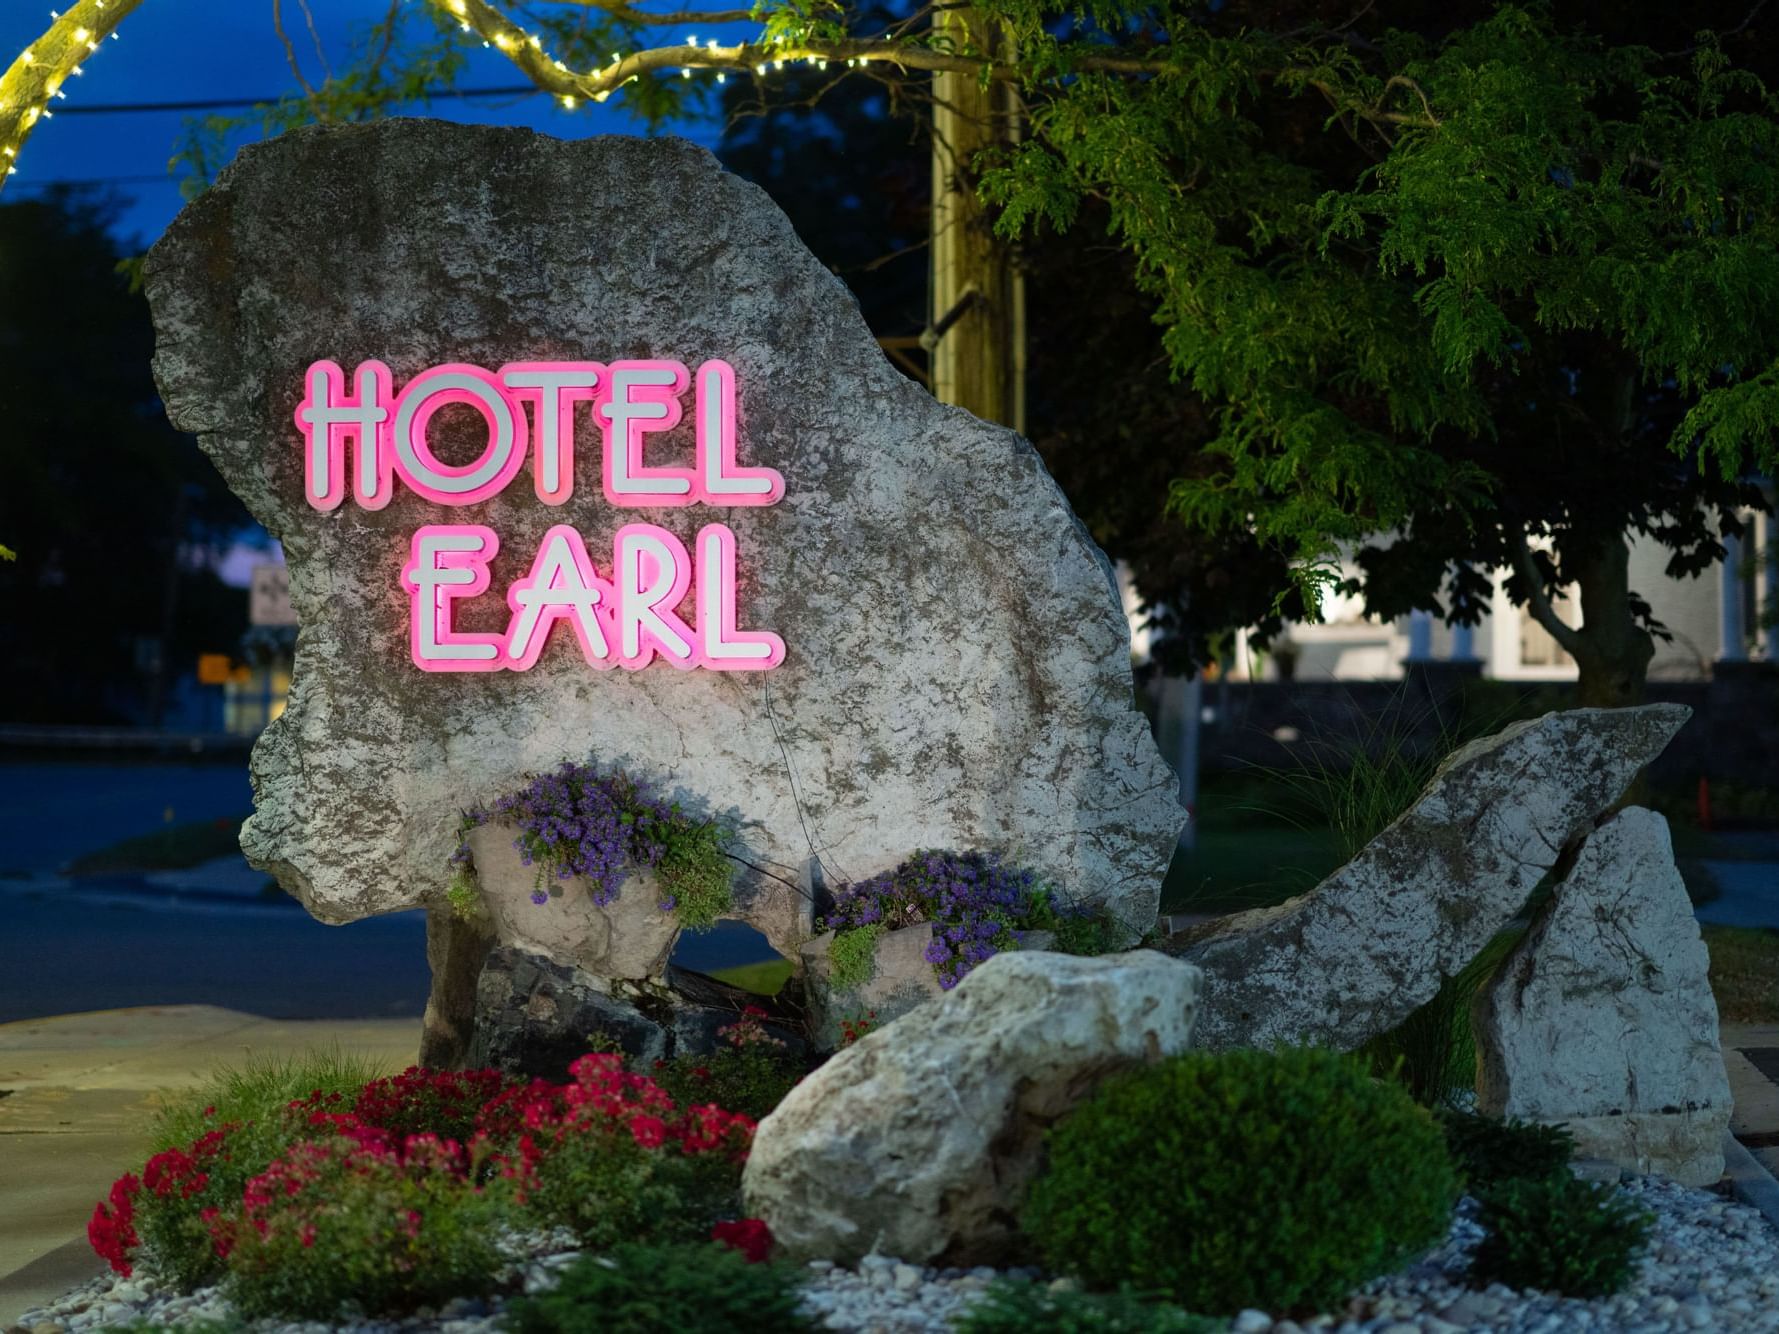 Famous beaver stone and sign at Hotel Earl